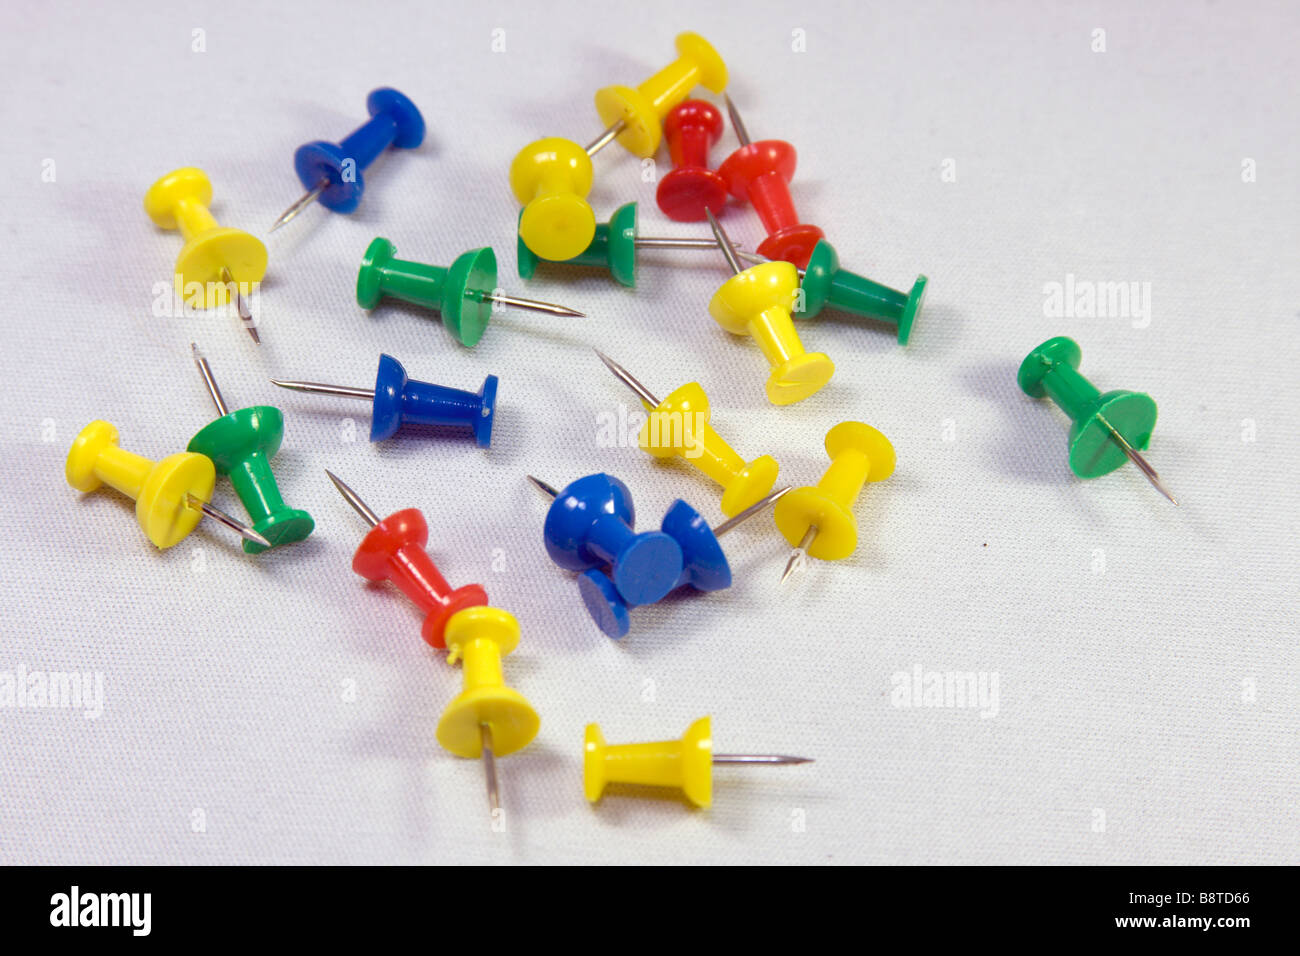 Wall push pins in different colors Stock Photo - Alamy